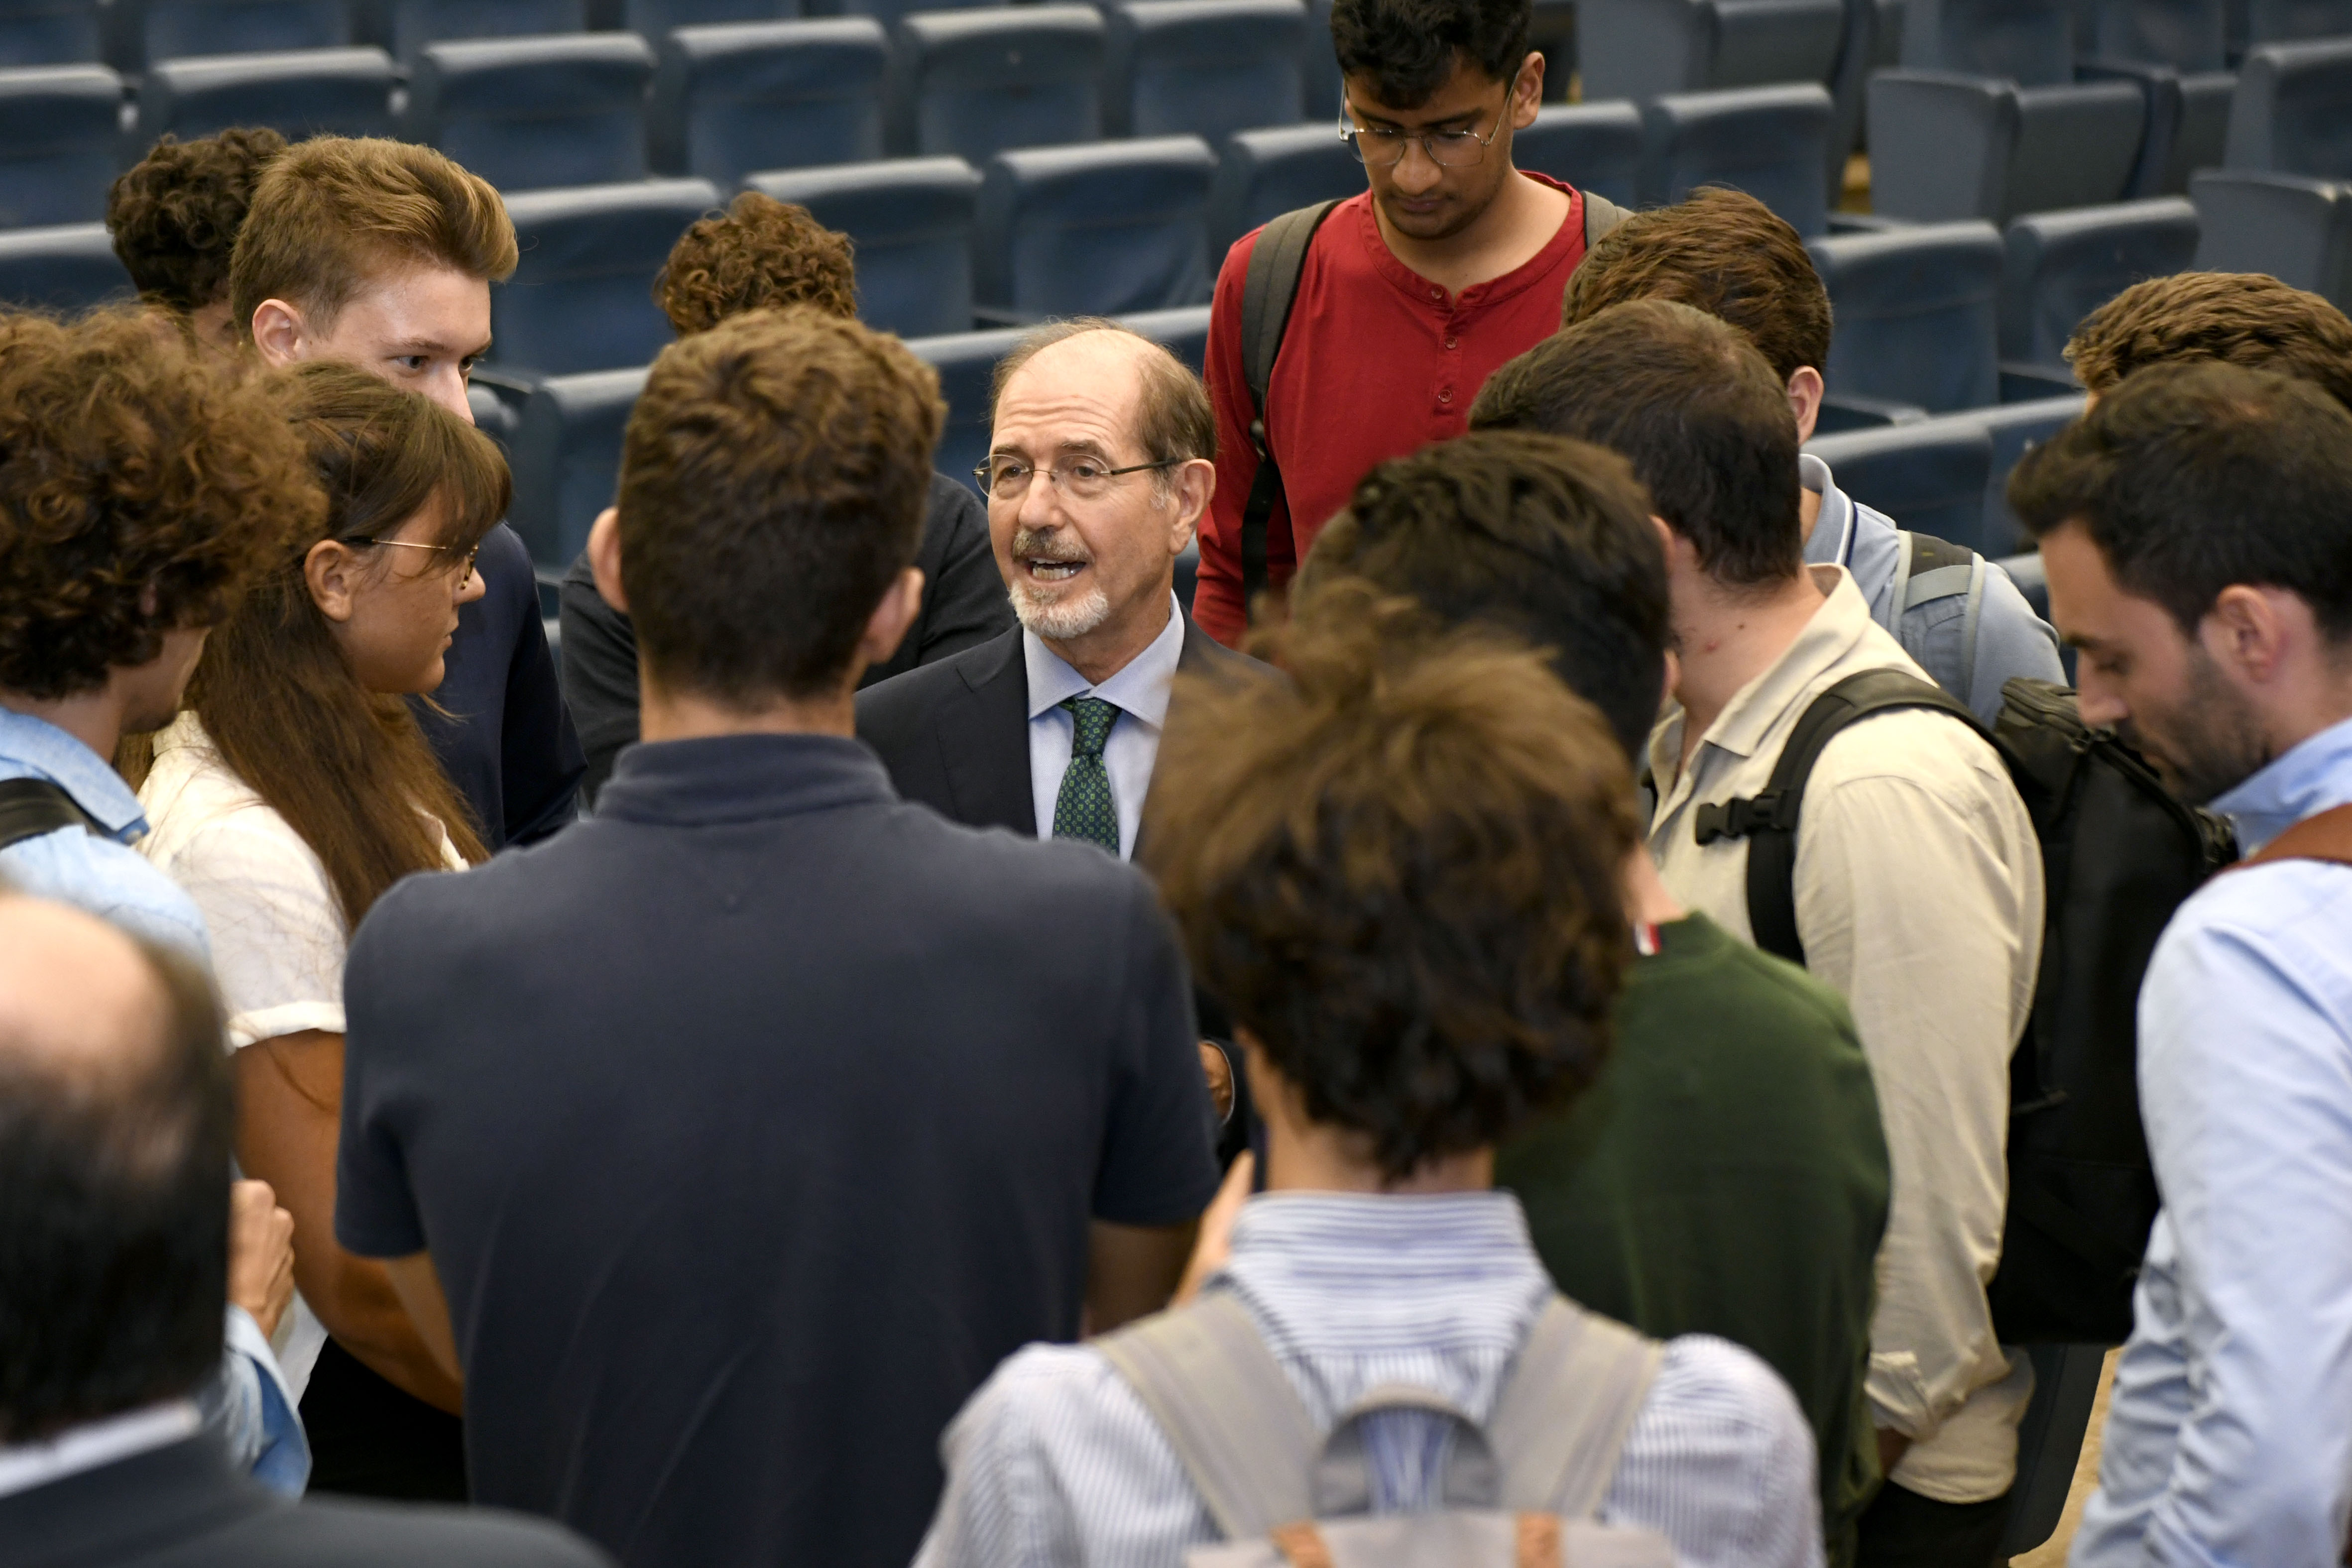 Silvio Micali, Algorand Founder and the Bocconi Students at the event